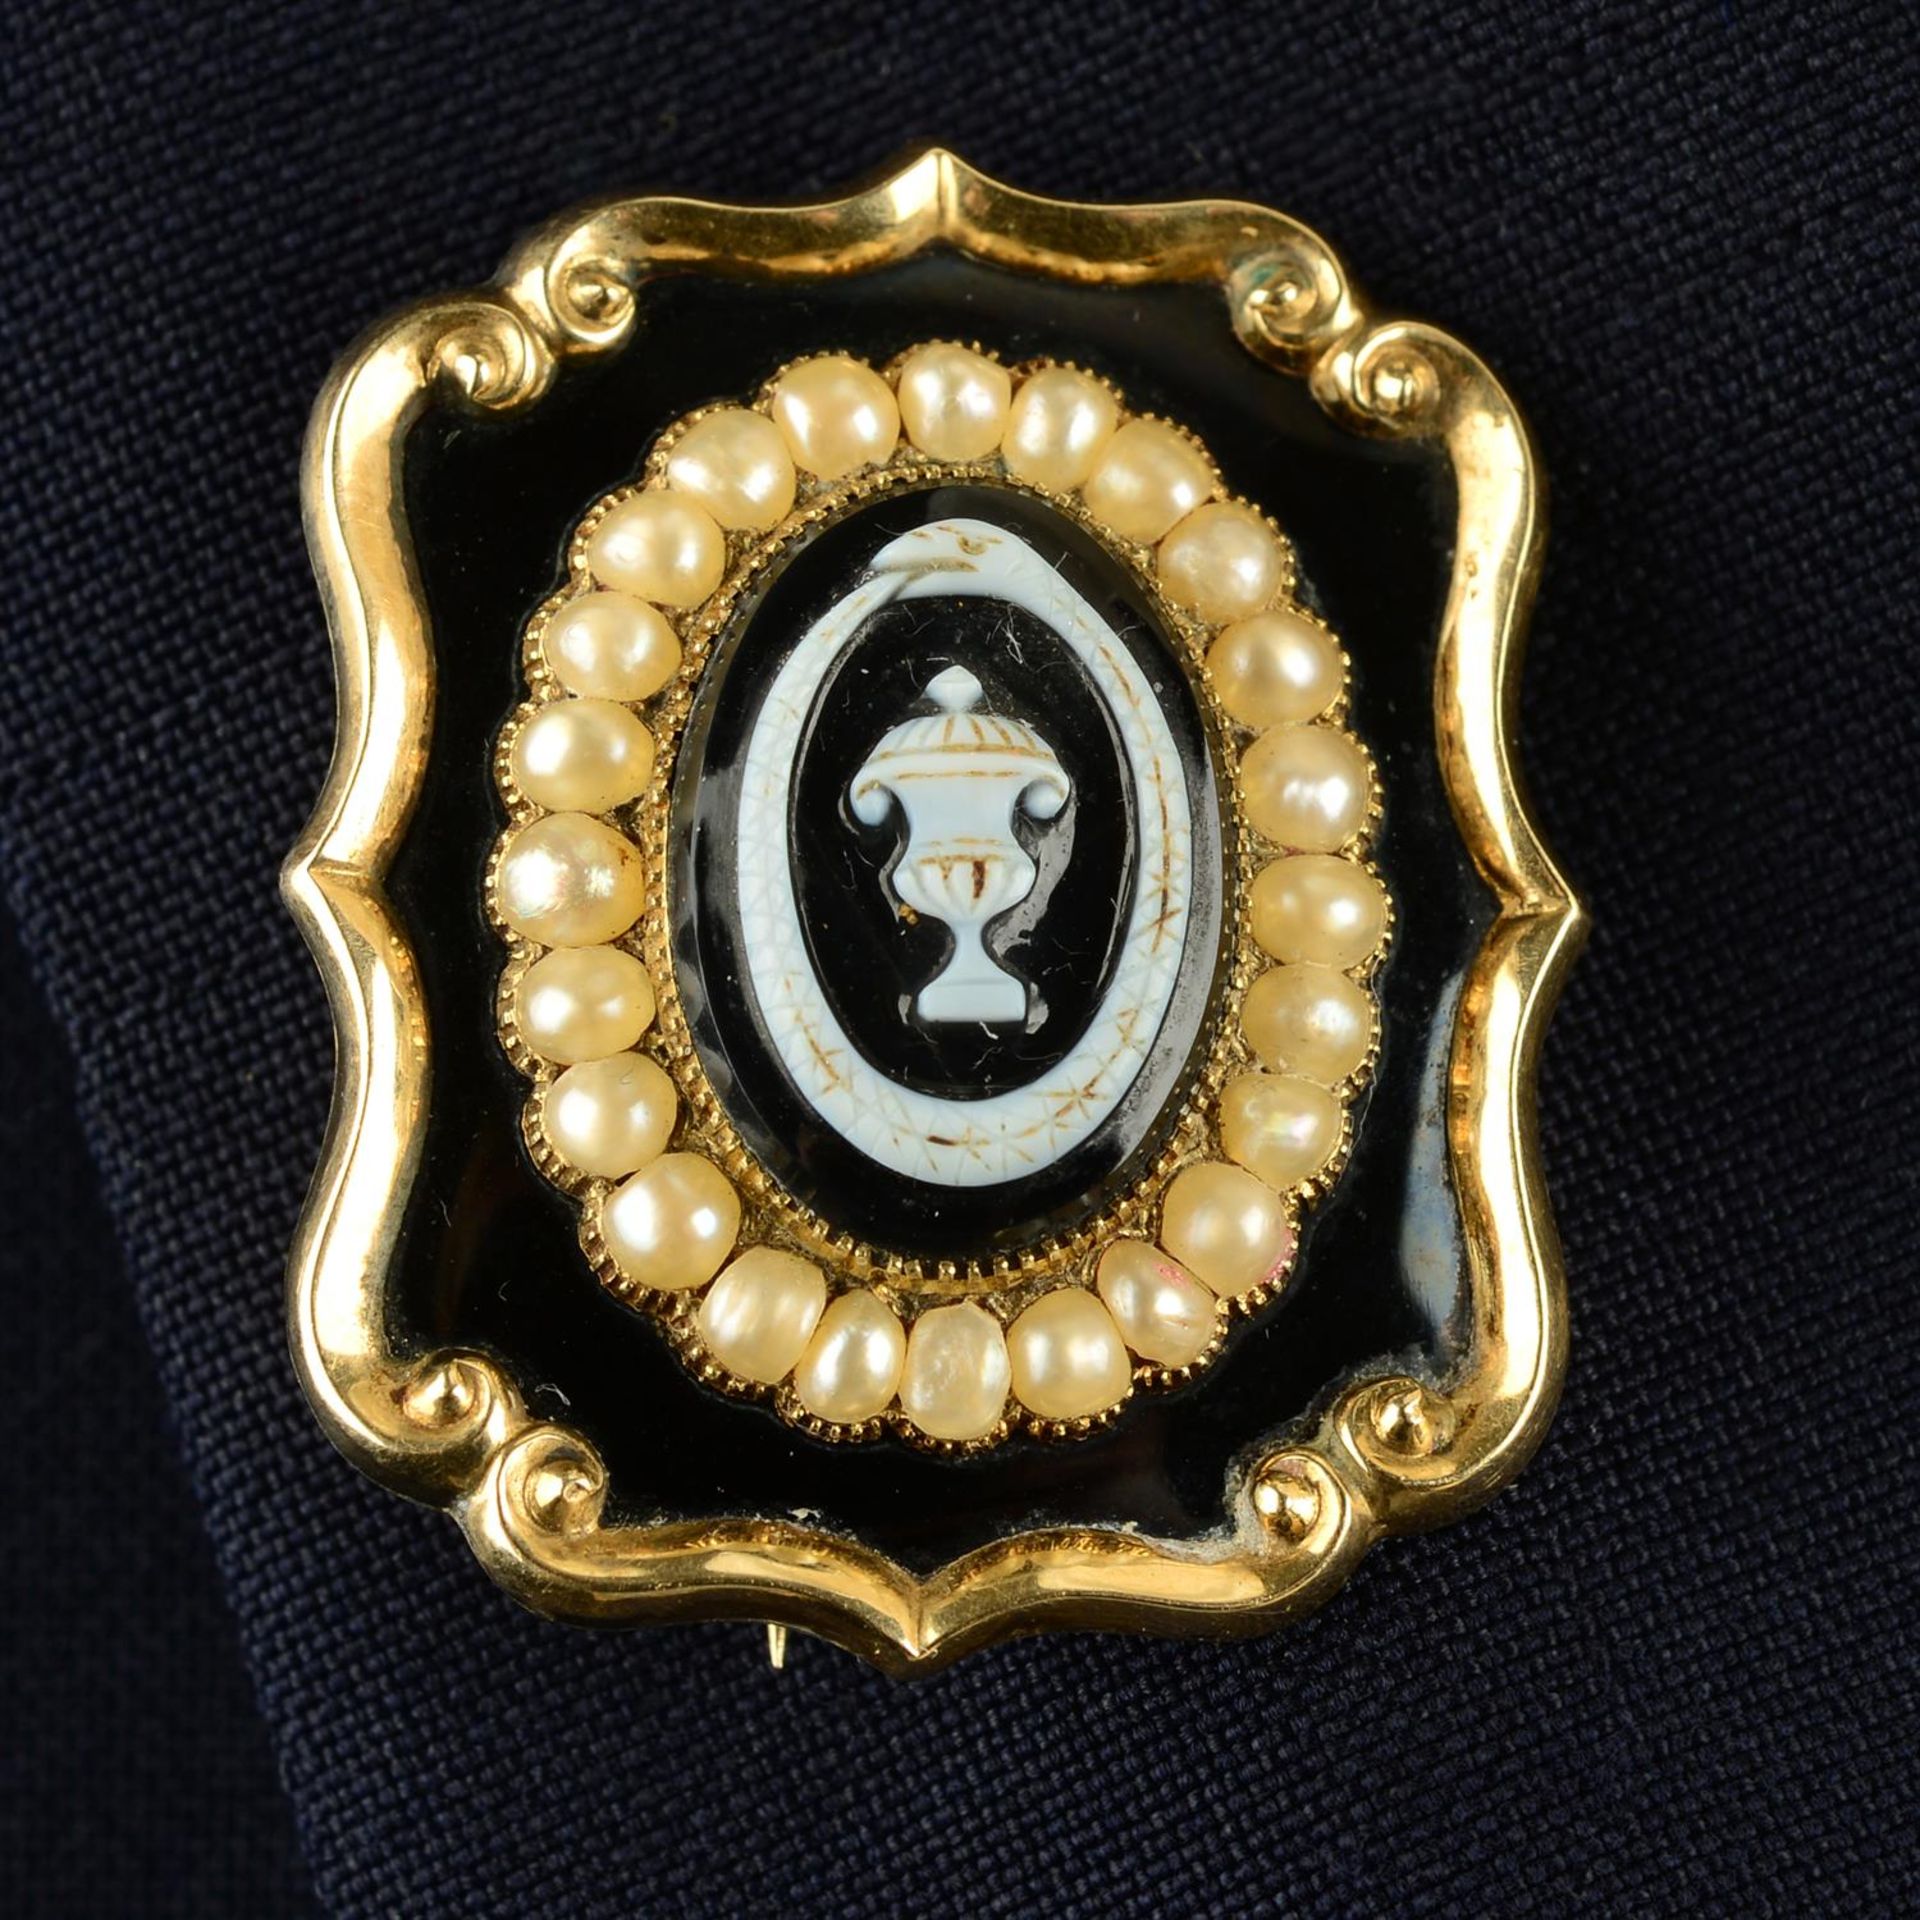 An early Victorian gold carved onyx urn and ouroboros mourning brooch, with split pearl and black